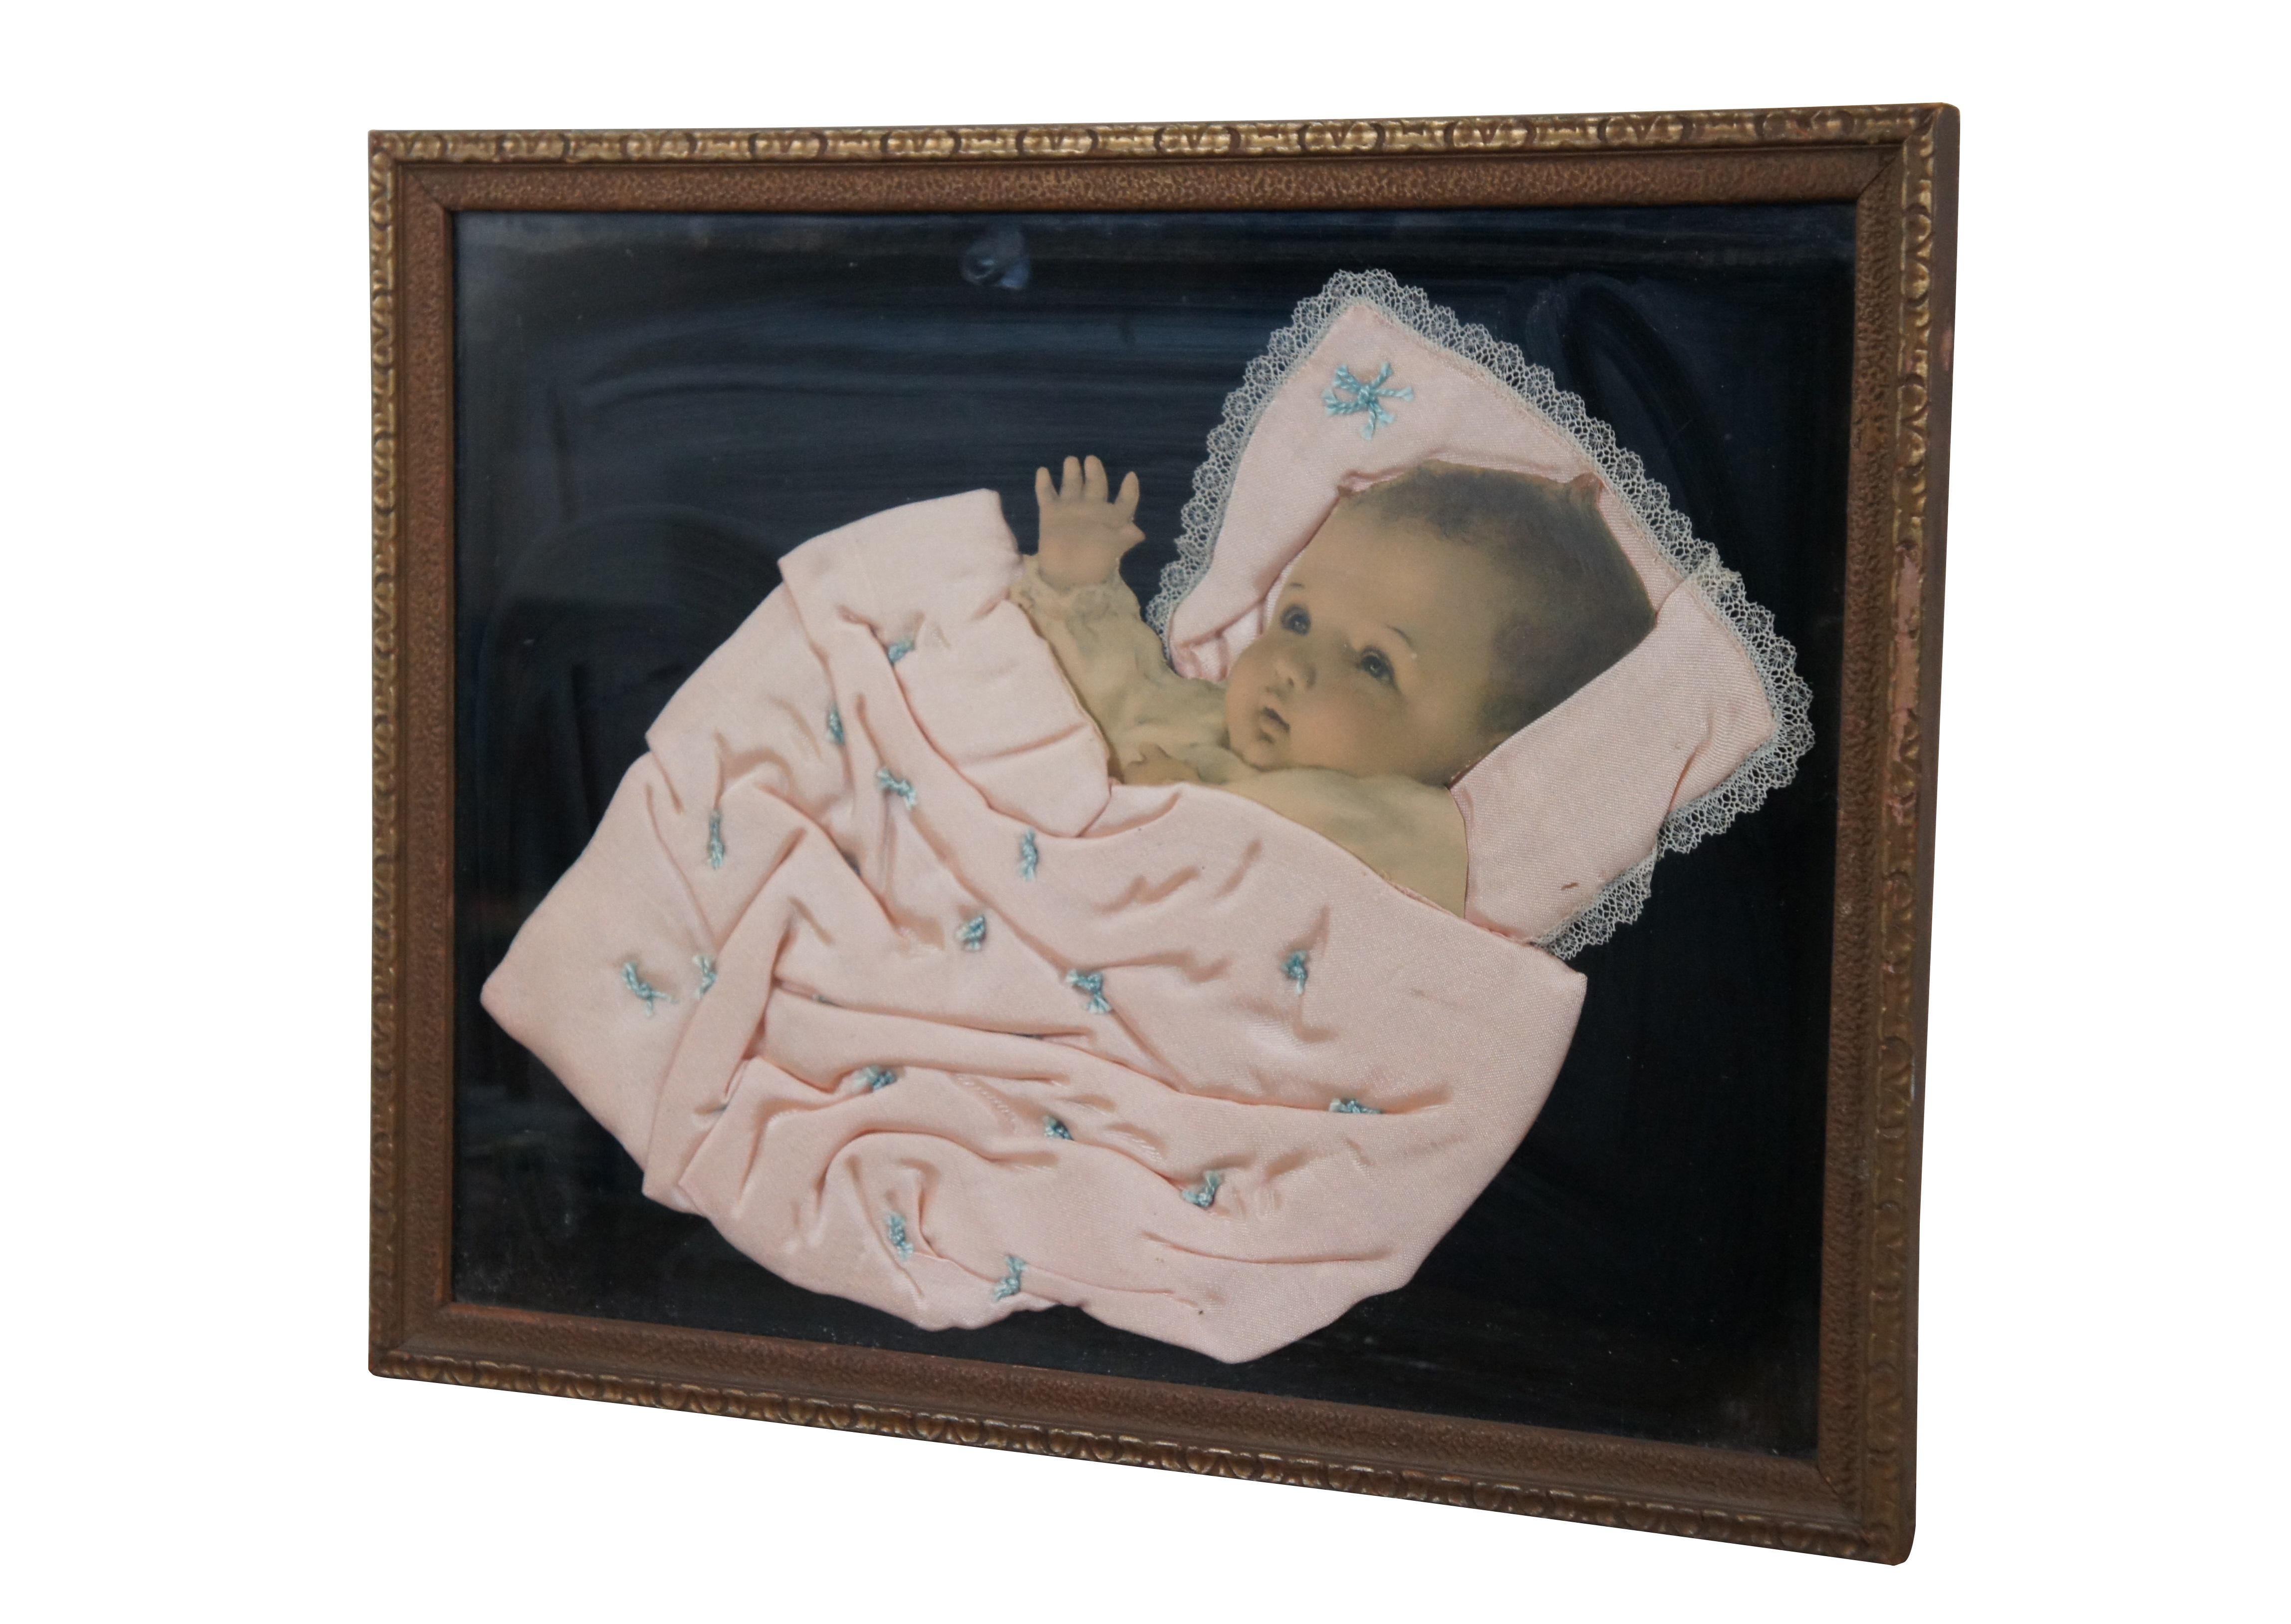 Early 20th century framed pink baby blanket with stitched blue tufting and lace trim, nestled around a die cut photograph of a baby, mounted on a backdrop of black velvet. Possibly a piece of memorial / mourning art, purportedly popular from the